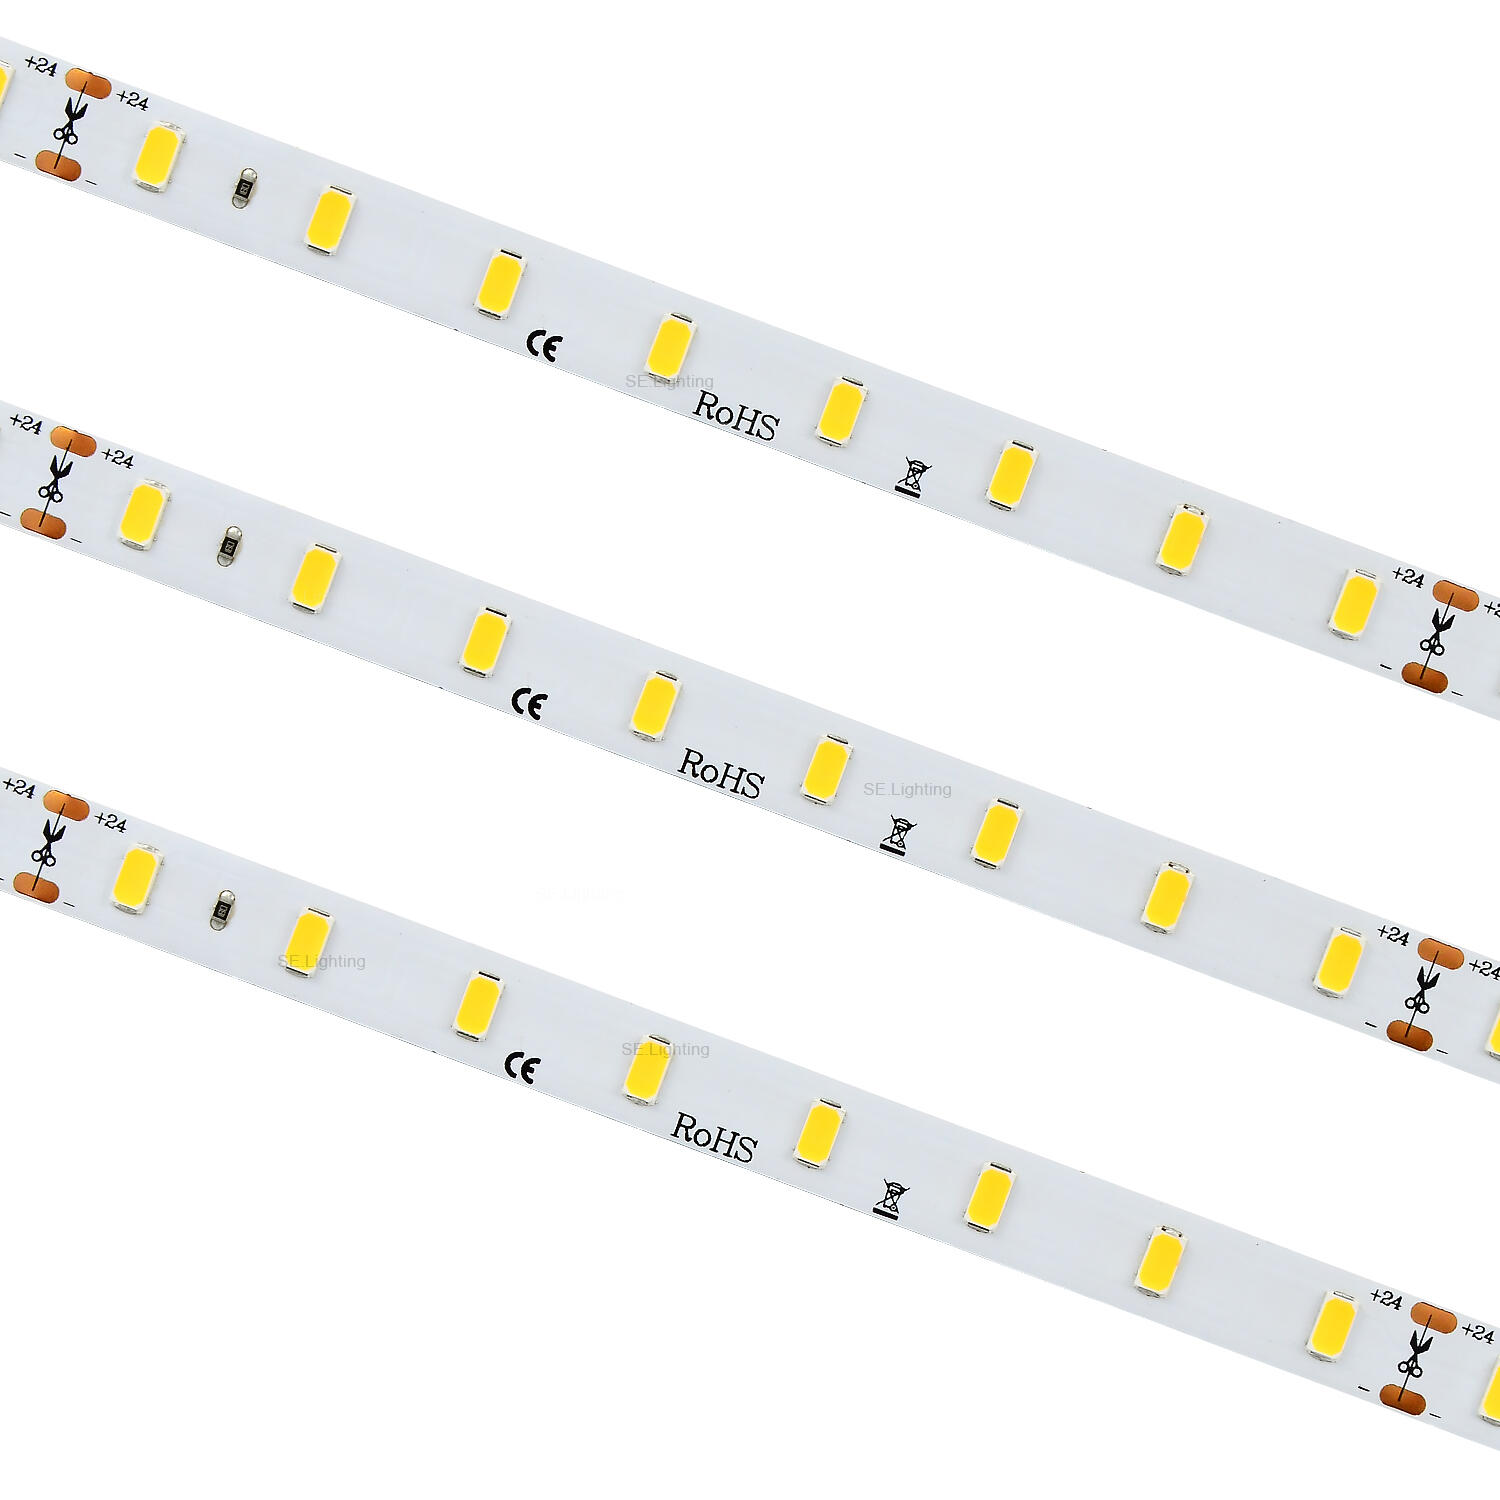 SMD 5630 COOL White LED Module Light Waterproof | 5 strip of 3 LED